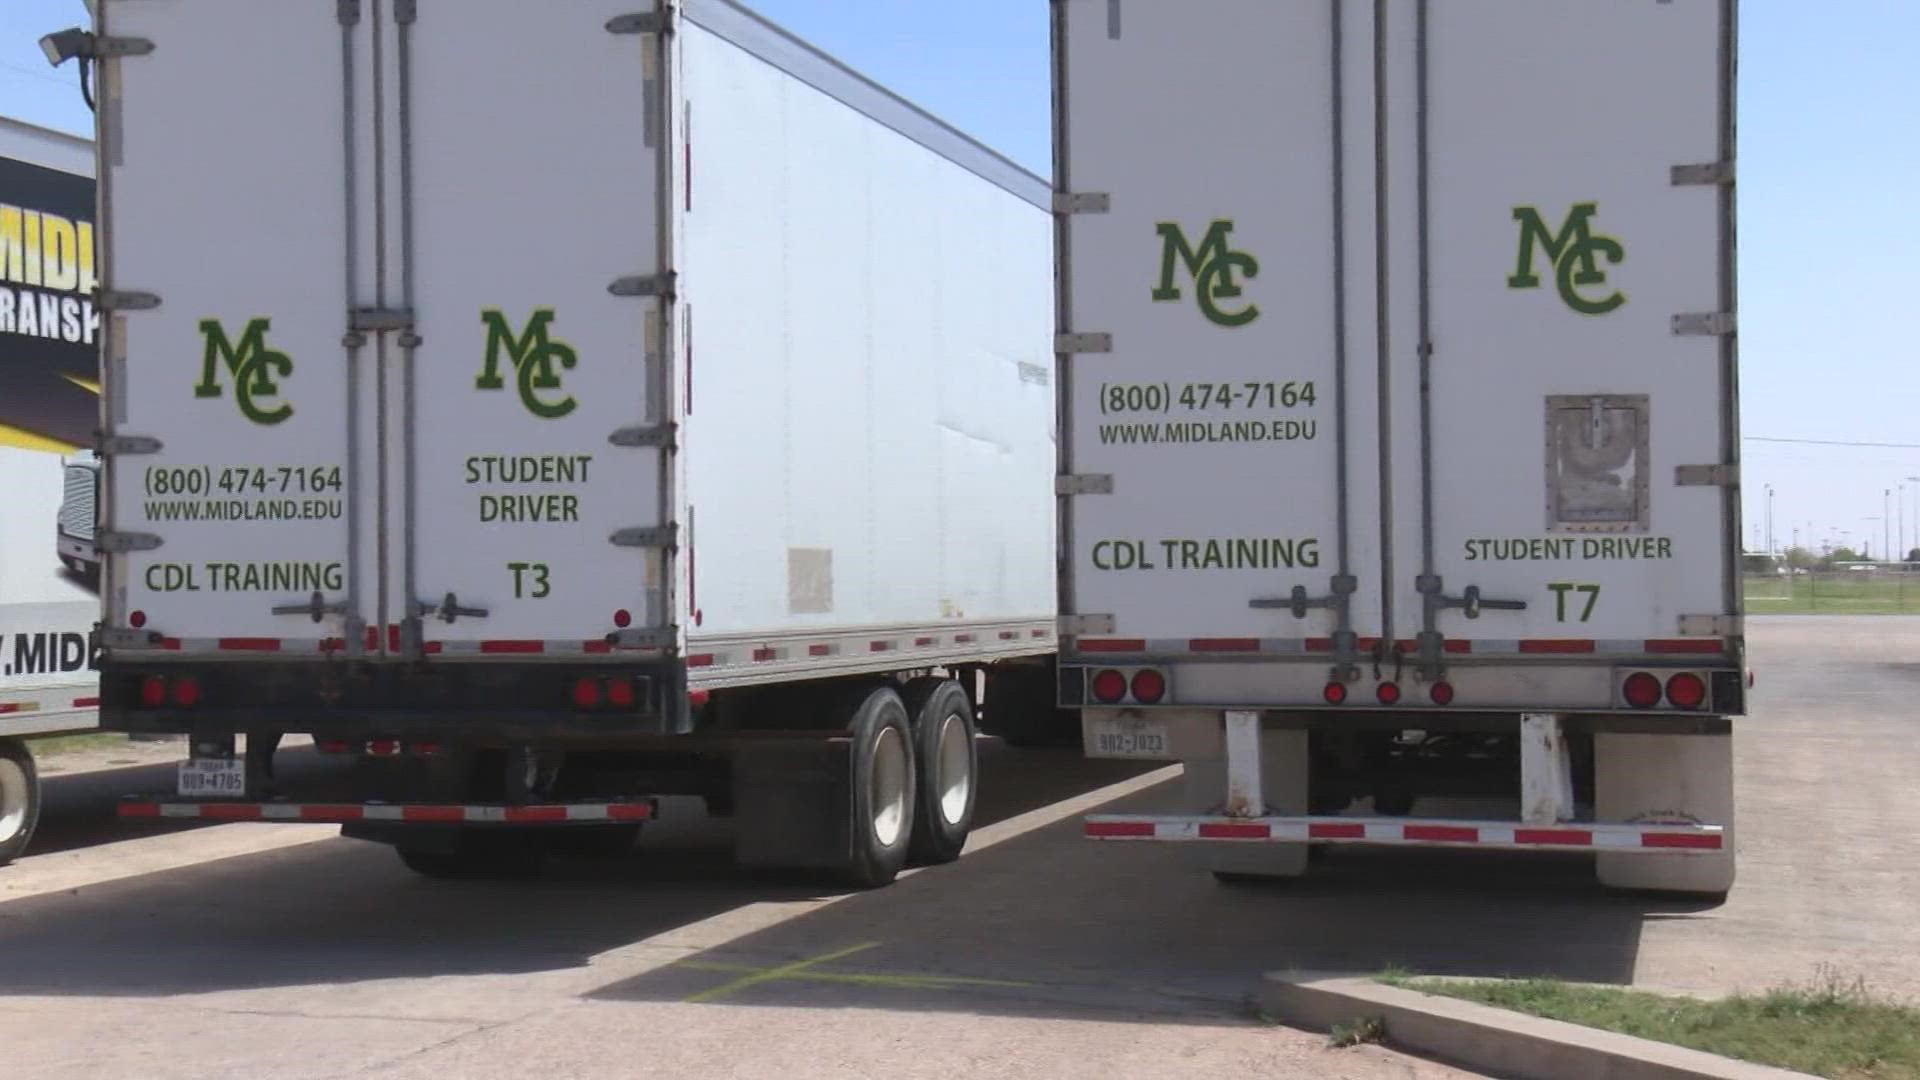 The opportunity could add more truck drivers to the Permian Basin, an area that needs them.